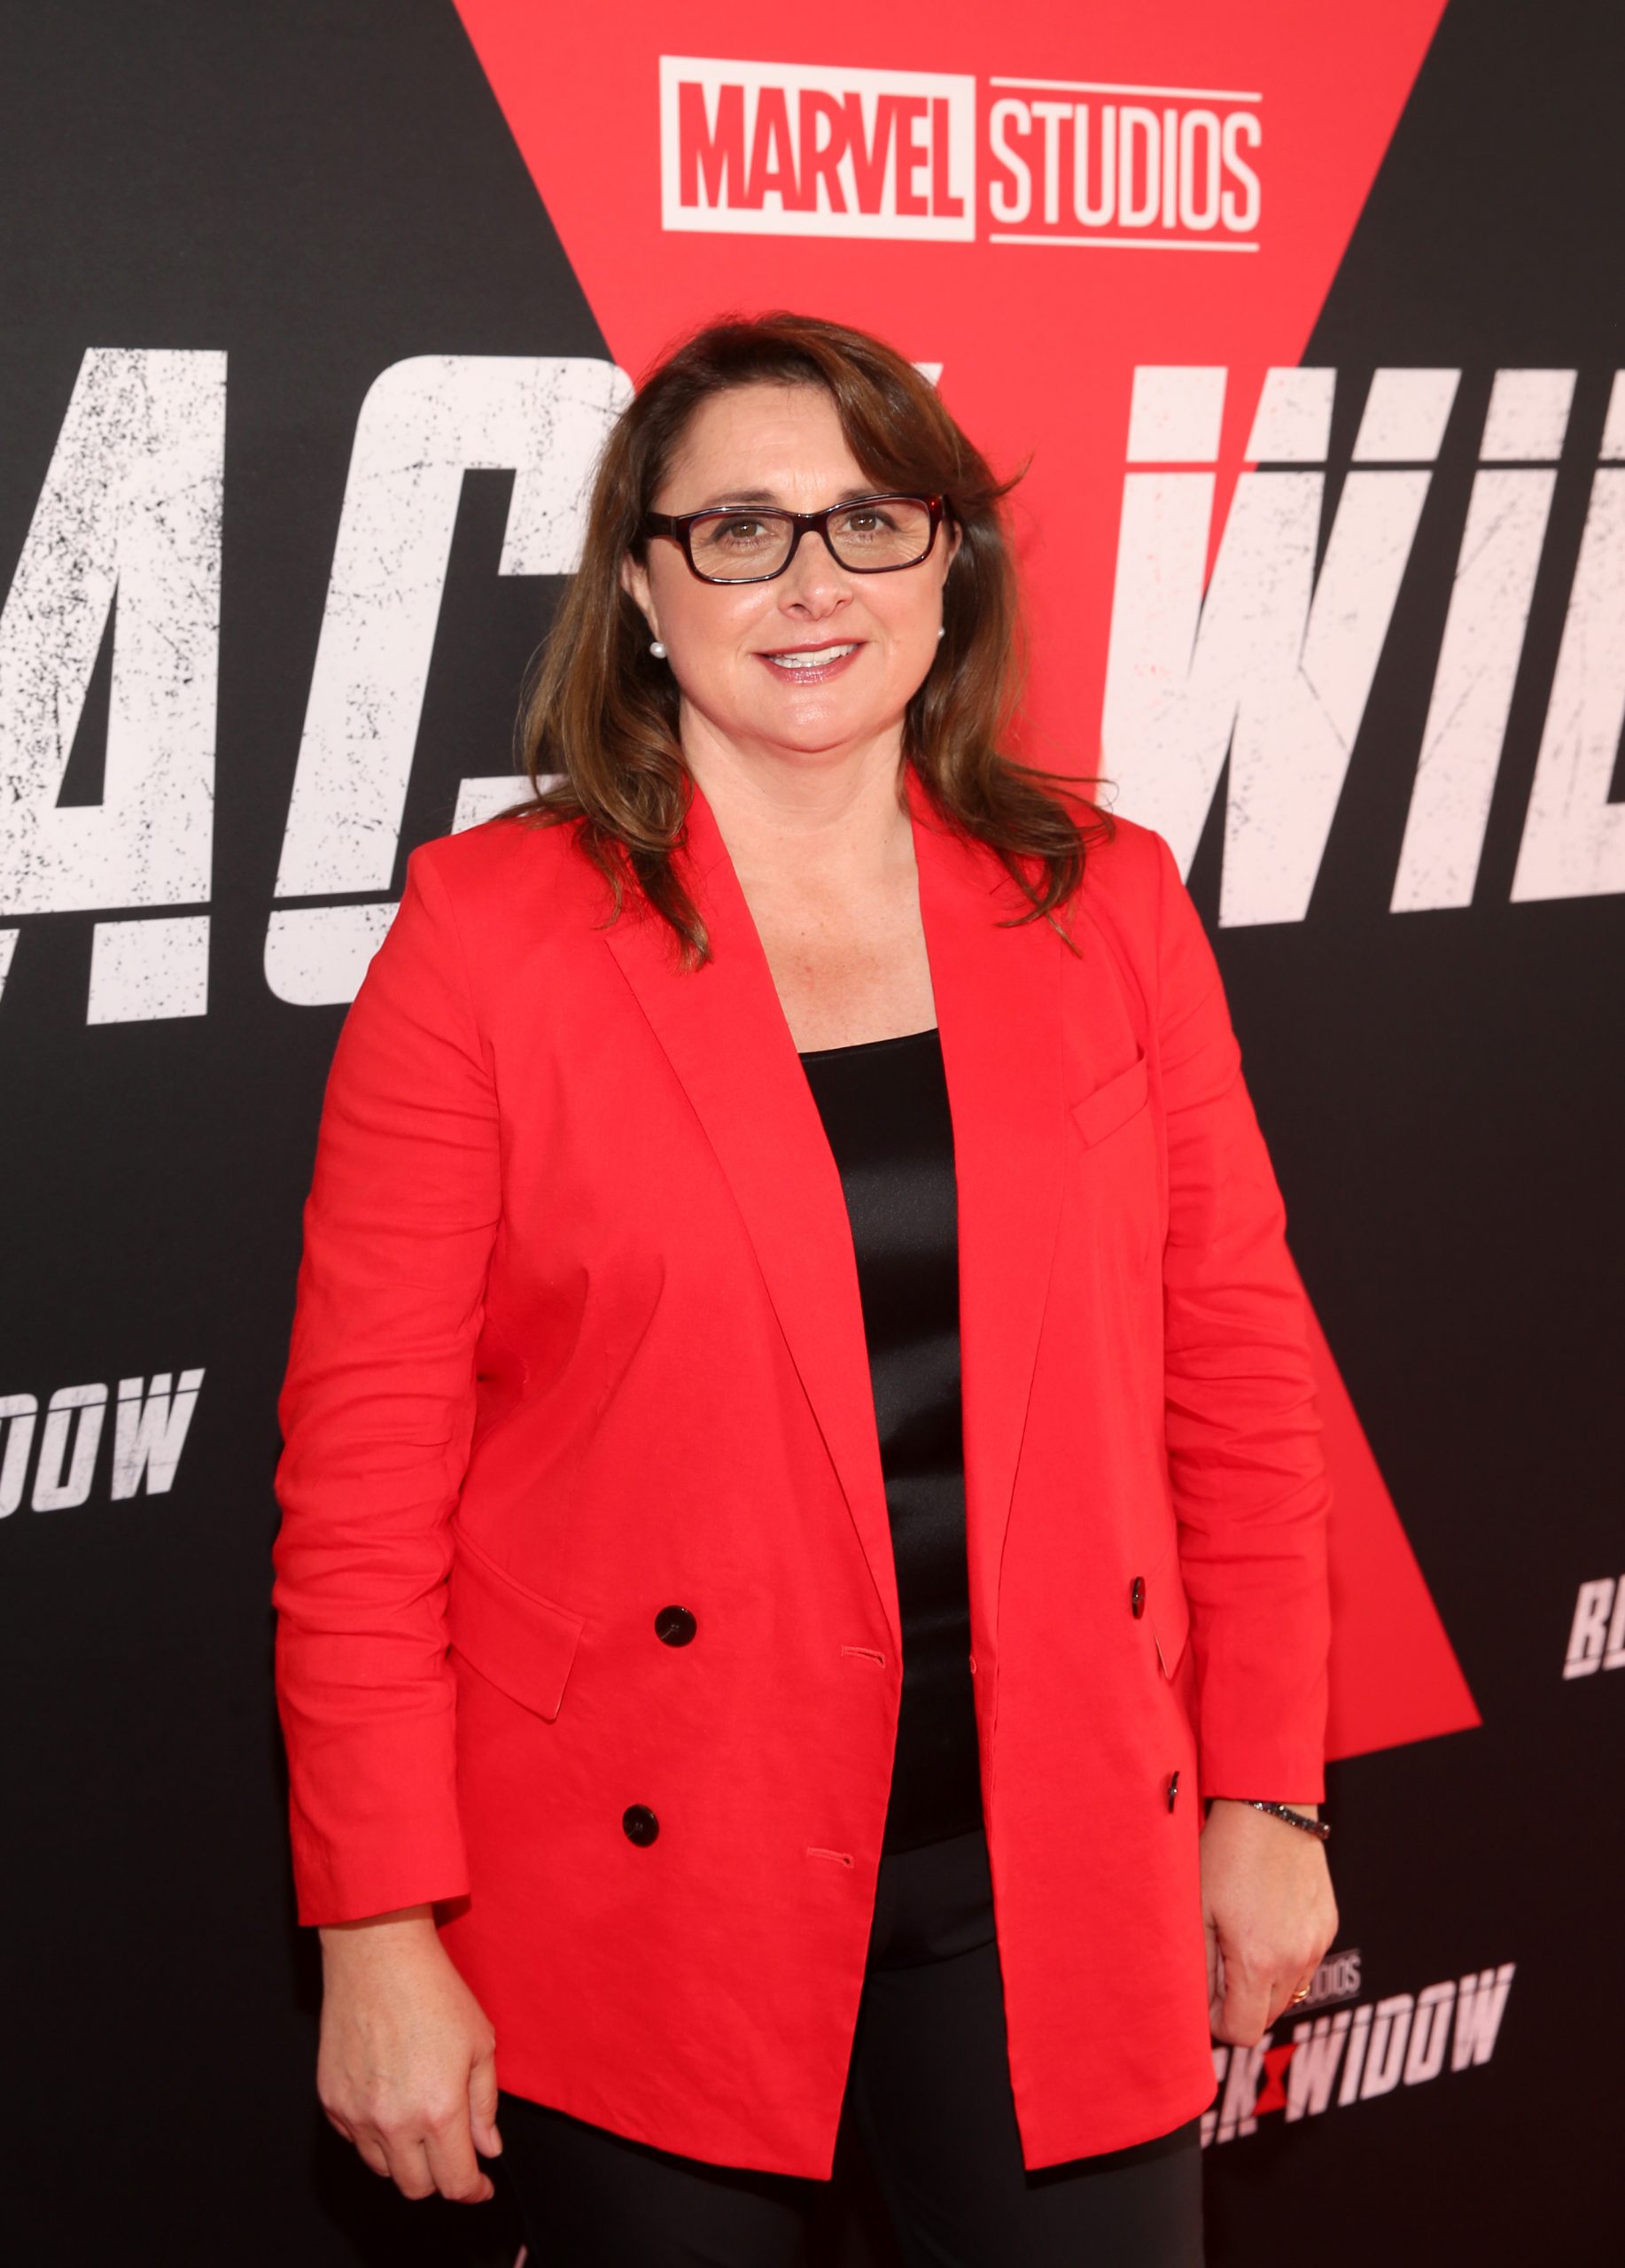 LOS ANGELES, CALIFORNIA - JUNE 29: Executive Producer and Executive VP of Production Marvel Studios Victoria Alonso attends the Black Widow World Premiere Fan Event at Dolby Theatre on June 29, 2021 in Los Angeles, California. (Photo by Jesse Grant/Getty Images for Disney)